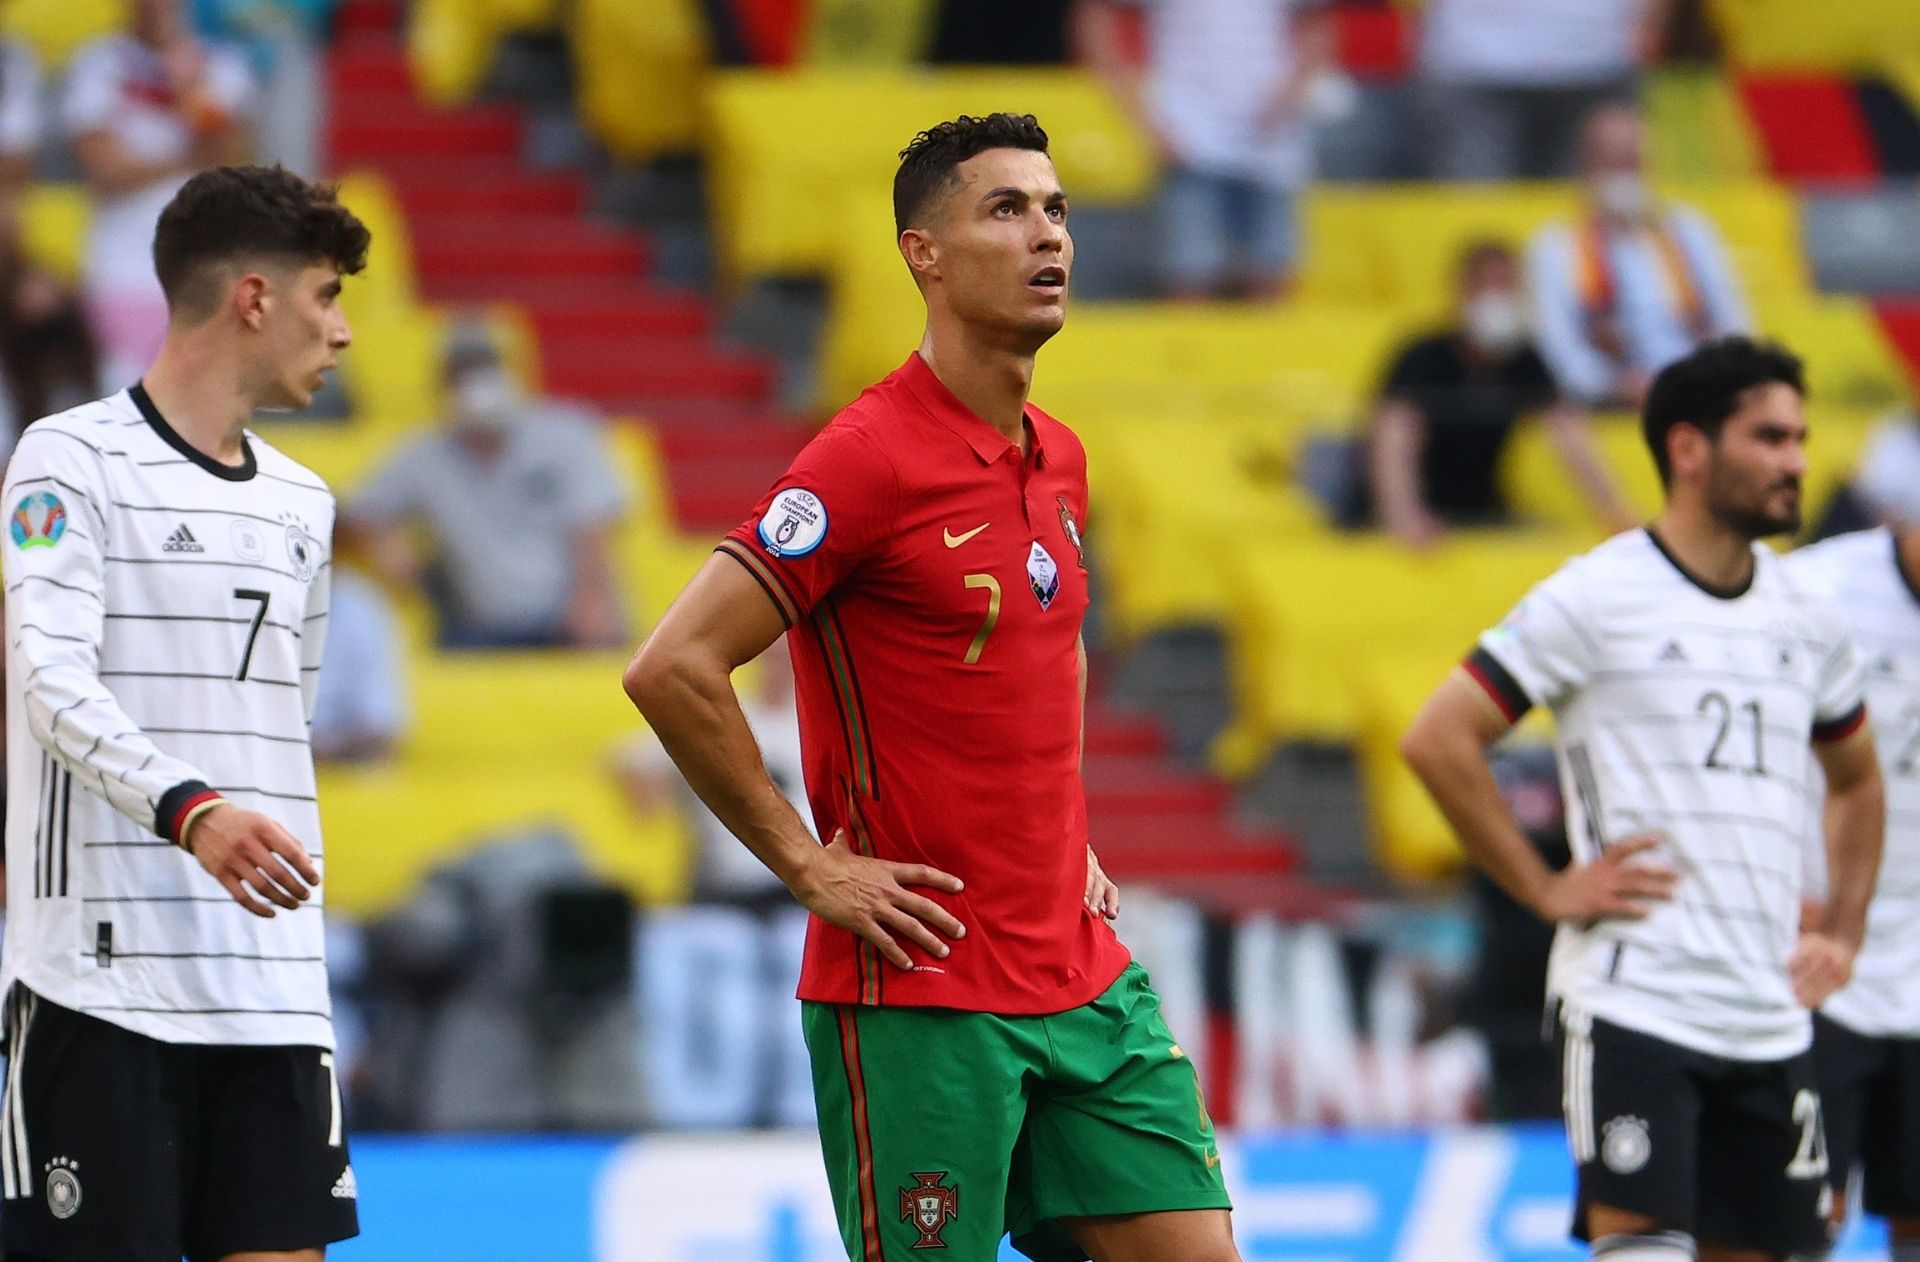 Euro 2020: Germany Defeat Portugal